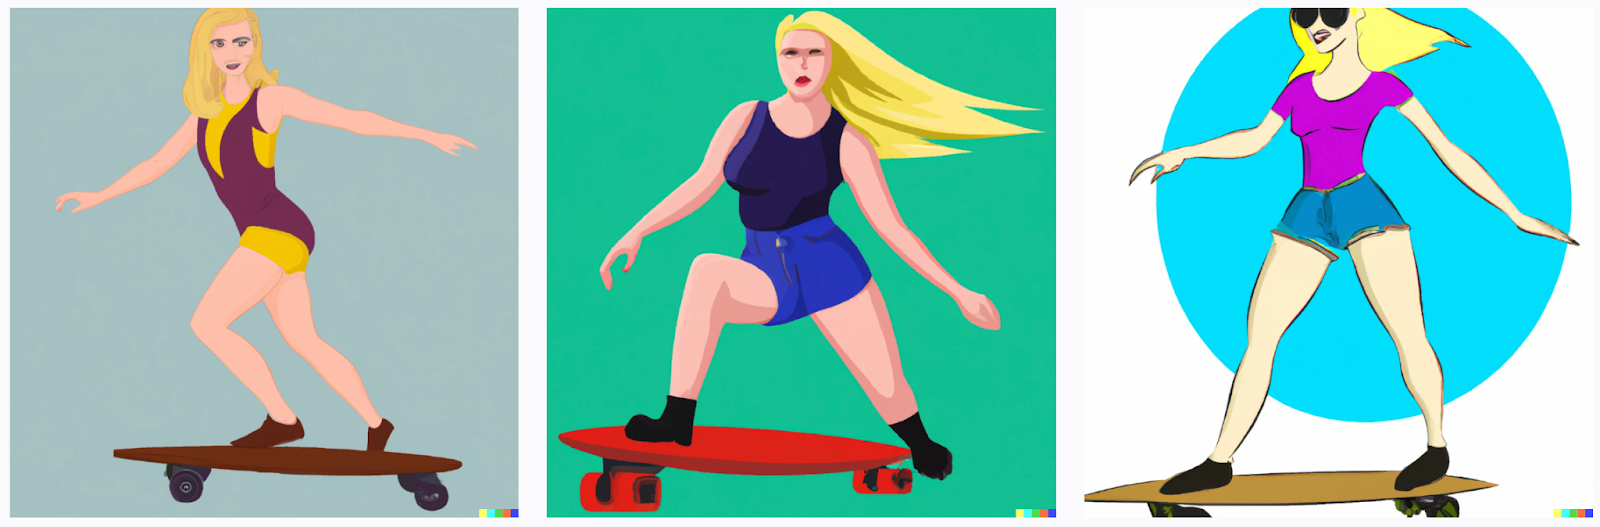 DALL-E 2 results for “drawing of a blonde woman riding a longboard” prompt